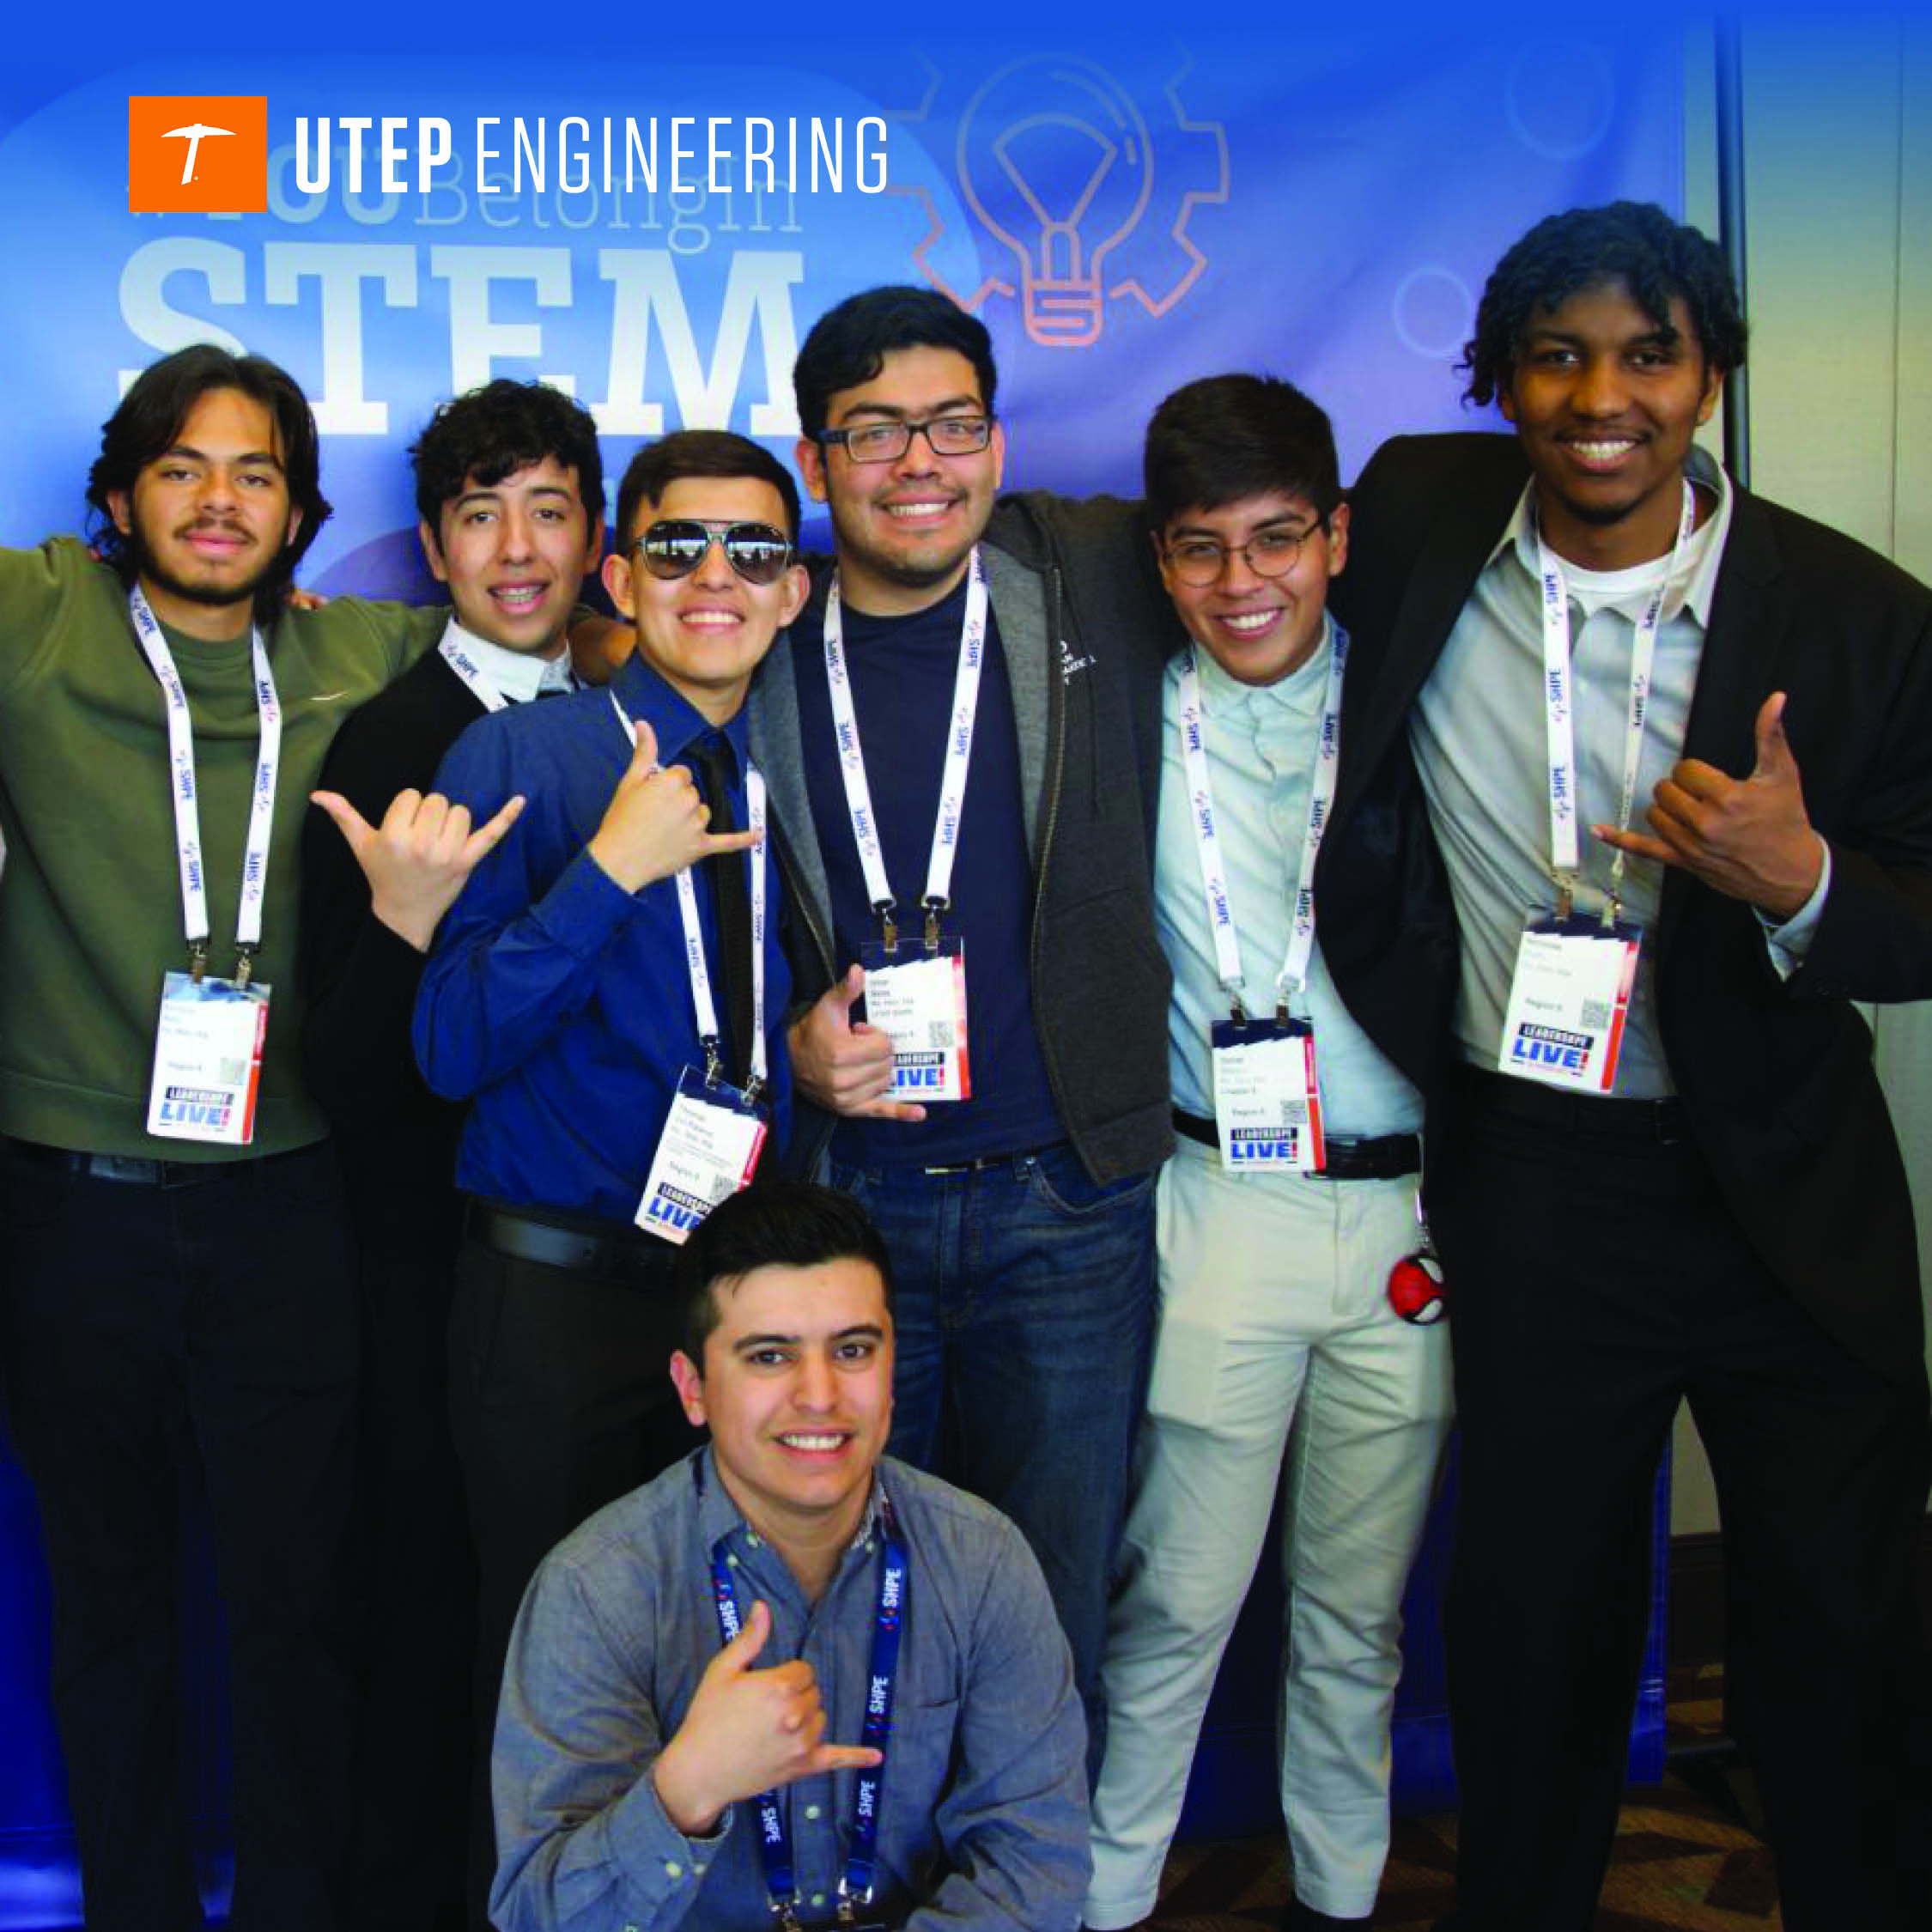 SHPE Hosts First Ever LeaderSHPE Live Conference UTEP MAES SHPE Chapter Attends